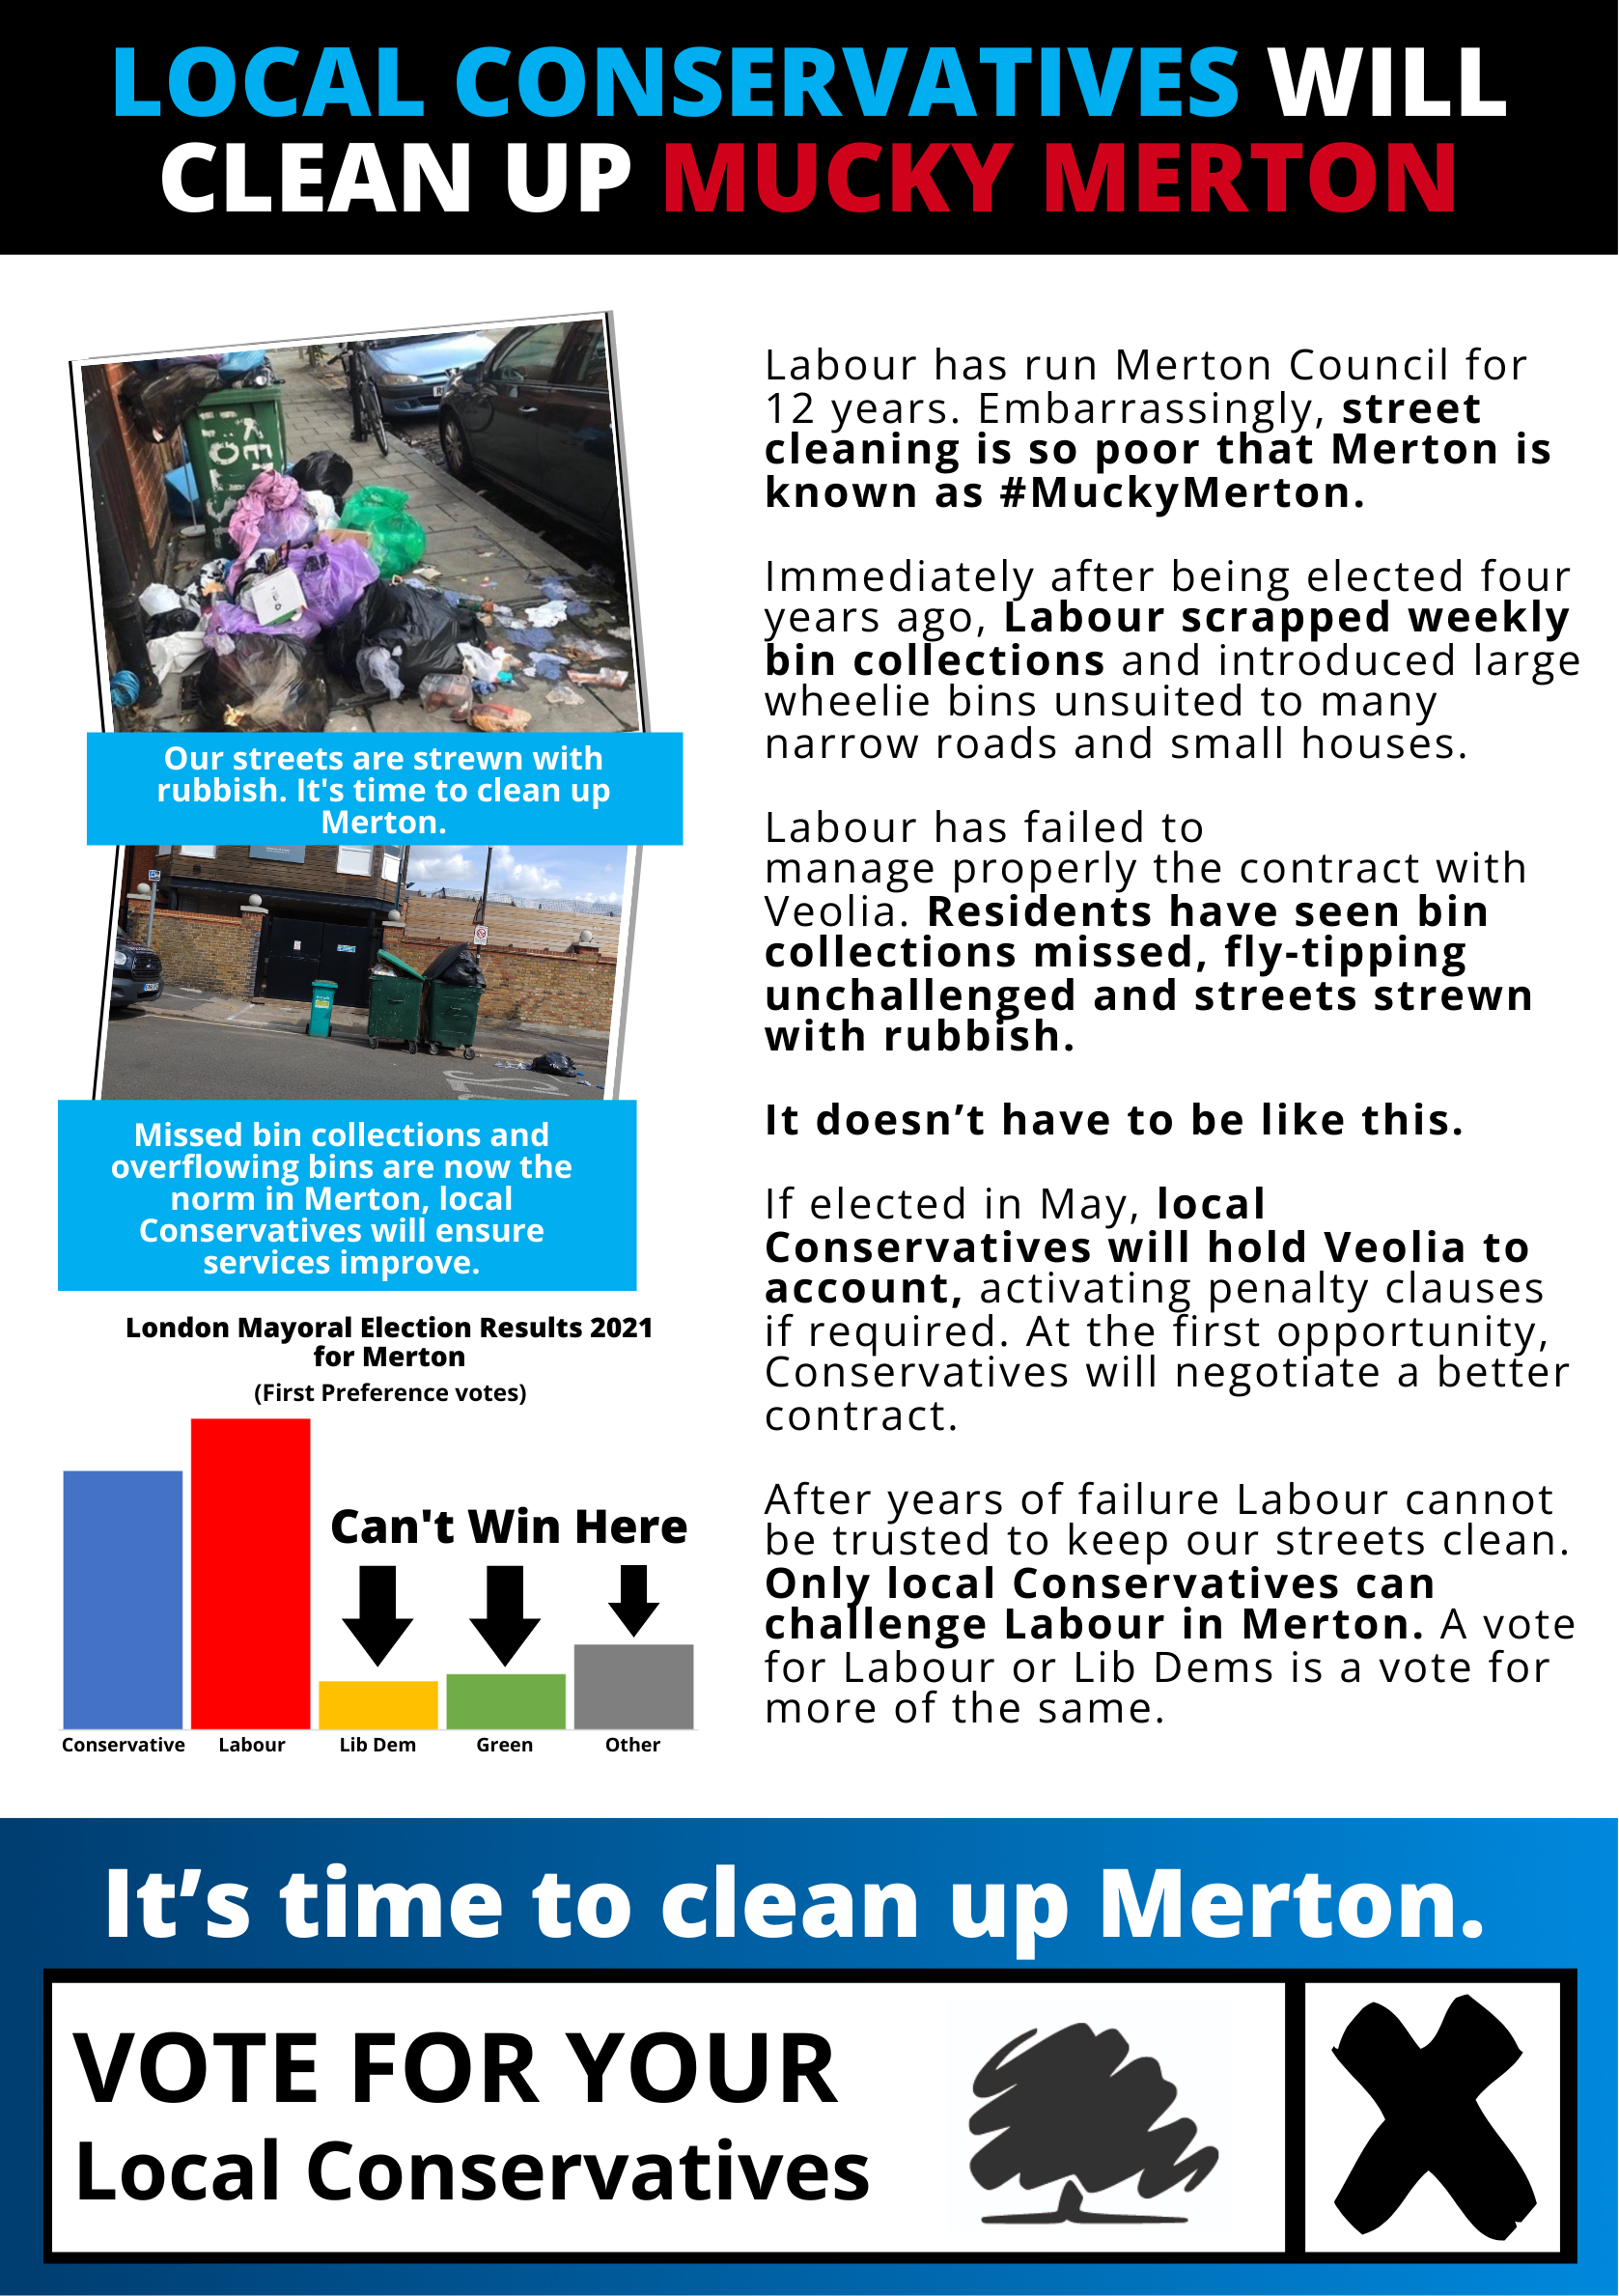 information on how local Conservatives will clean up Mucky Merton